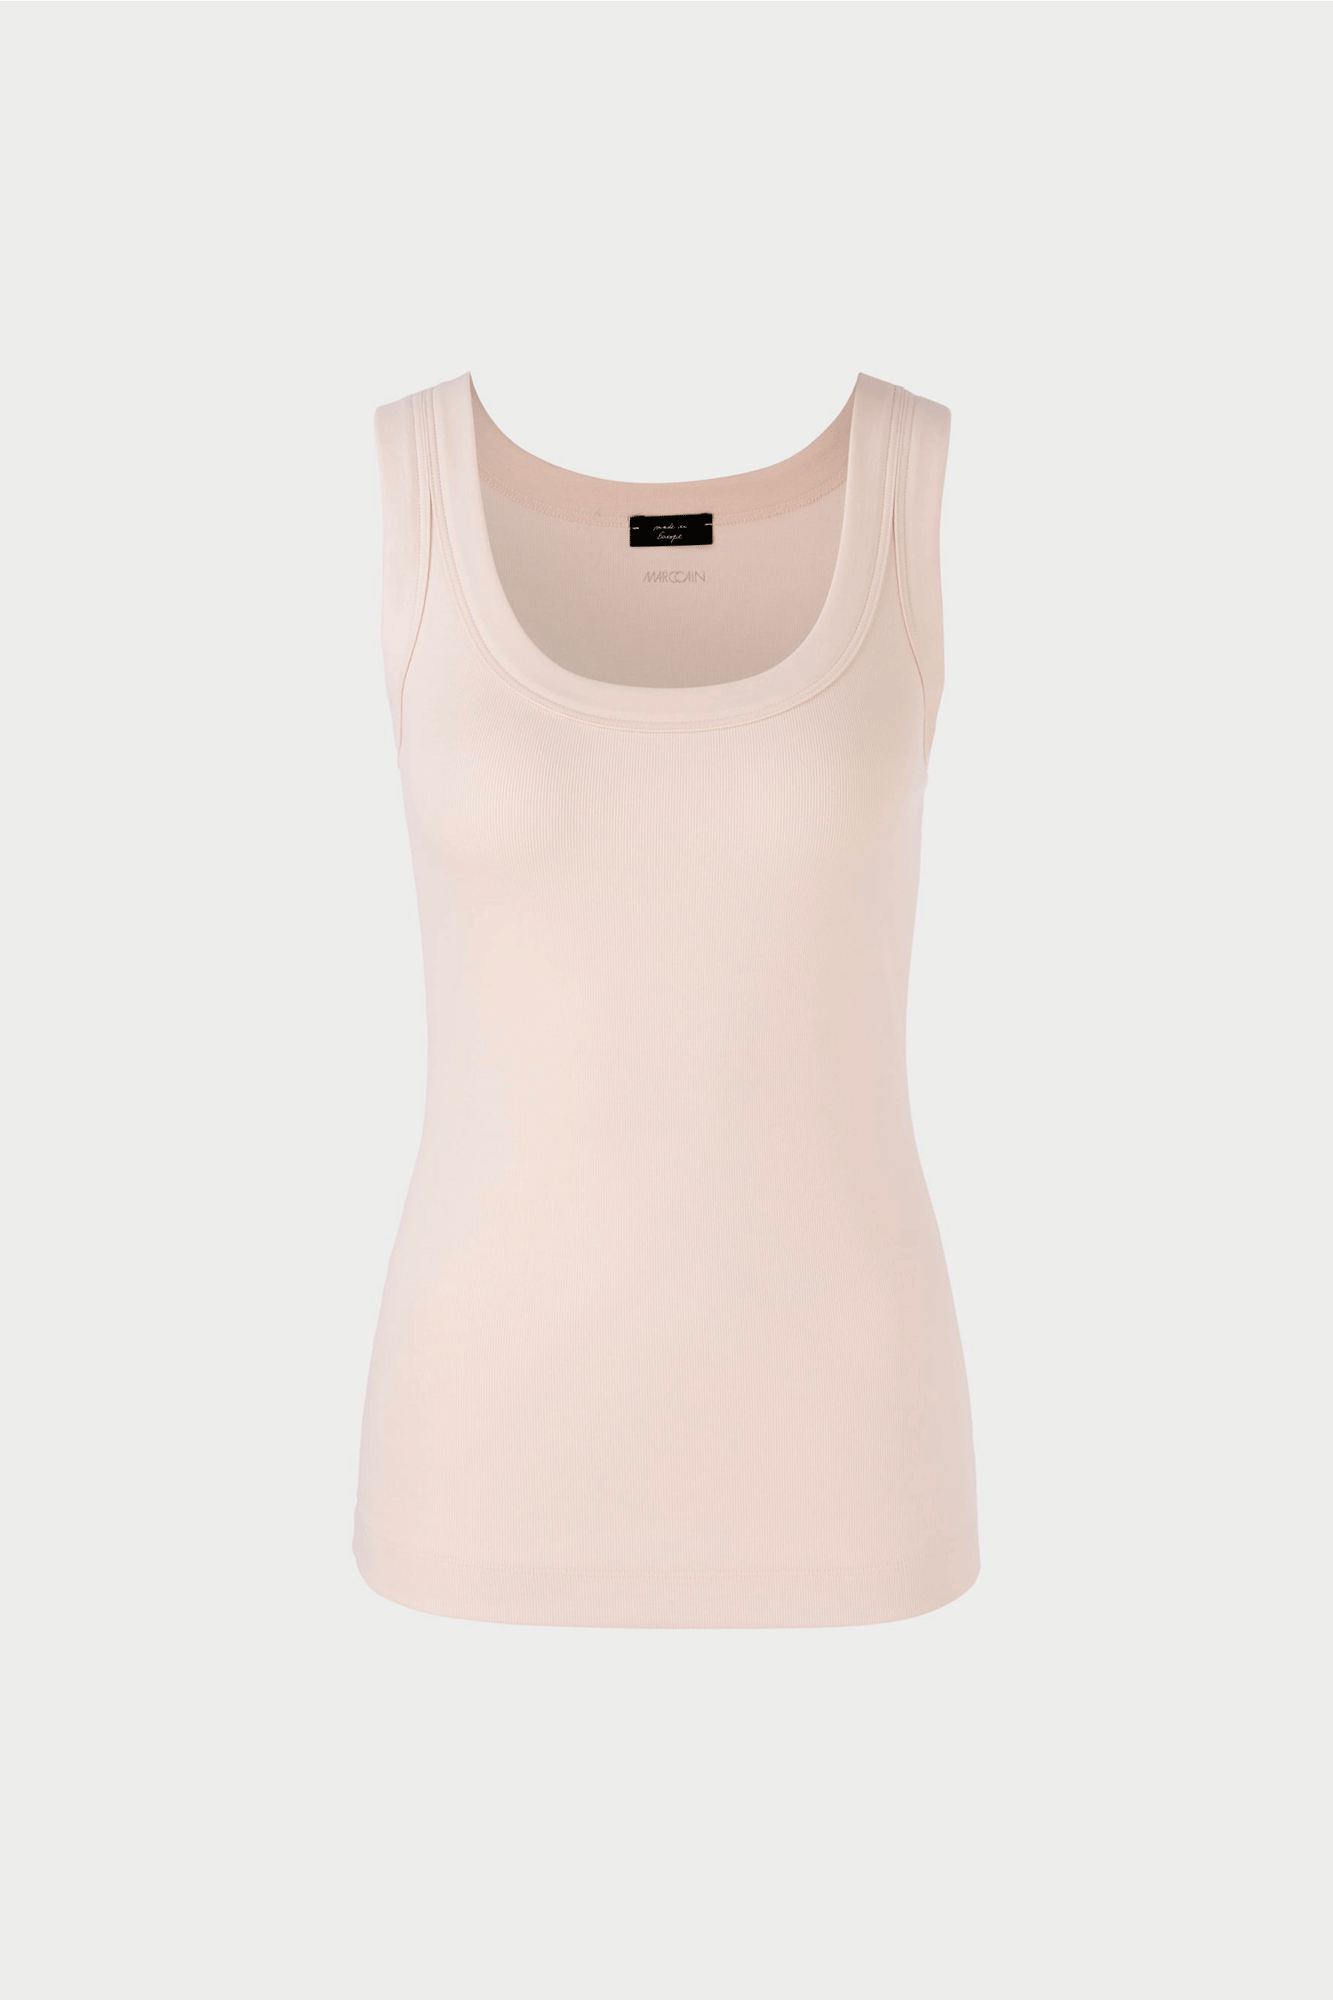 This Sleeveless Top from Marc Cain is a stylish and comfortable addition to any wardrobe. It's made from a flexible ribbed cotton fabric, with a slim fit and jersey shape. The deep, wide round neckline is framed with a striking wide edging, adding a unique style to the piece.